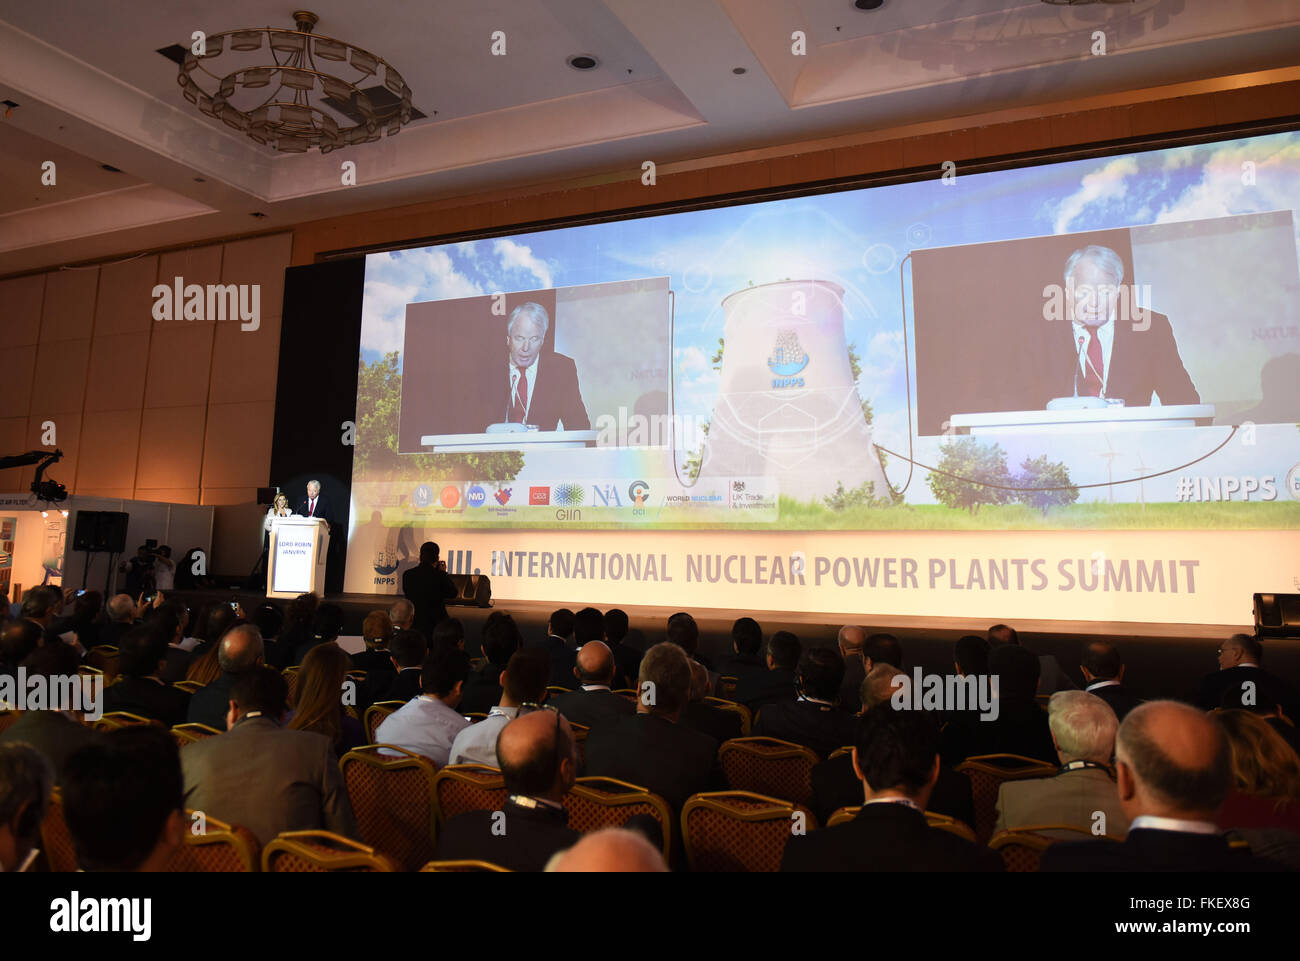 (160308) -- ISTANBUL, March 8, 2016(Xinhua) -- Photo taken on March 8, 2016 shows the 3rd International Nuclear Power Plants Summit in Istanbul, Turkey. The international nuclear power plants summit, the third of its kind held in Istanbul, kicked off here on Tuesday, attracting some 850 nuclear energy experts and executives from over 20 countries. (Xinhua/He Canling) Stock Photo